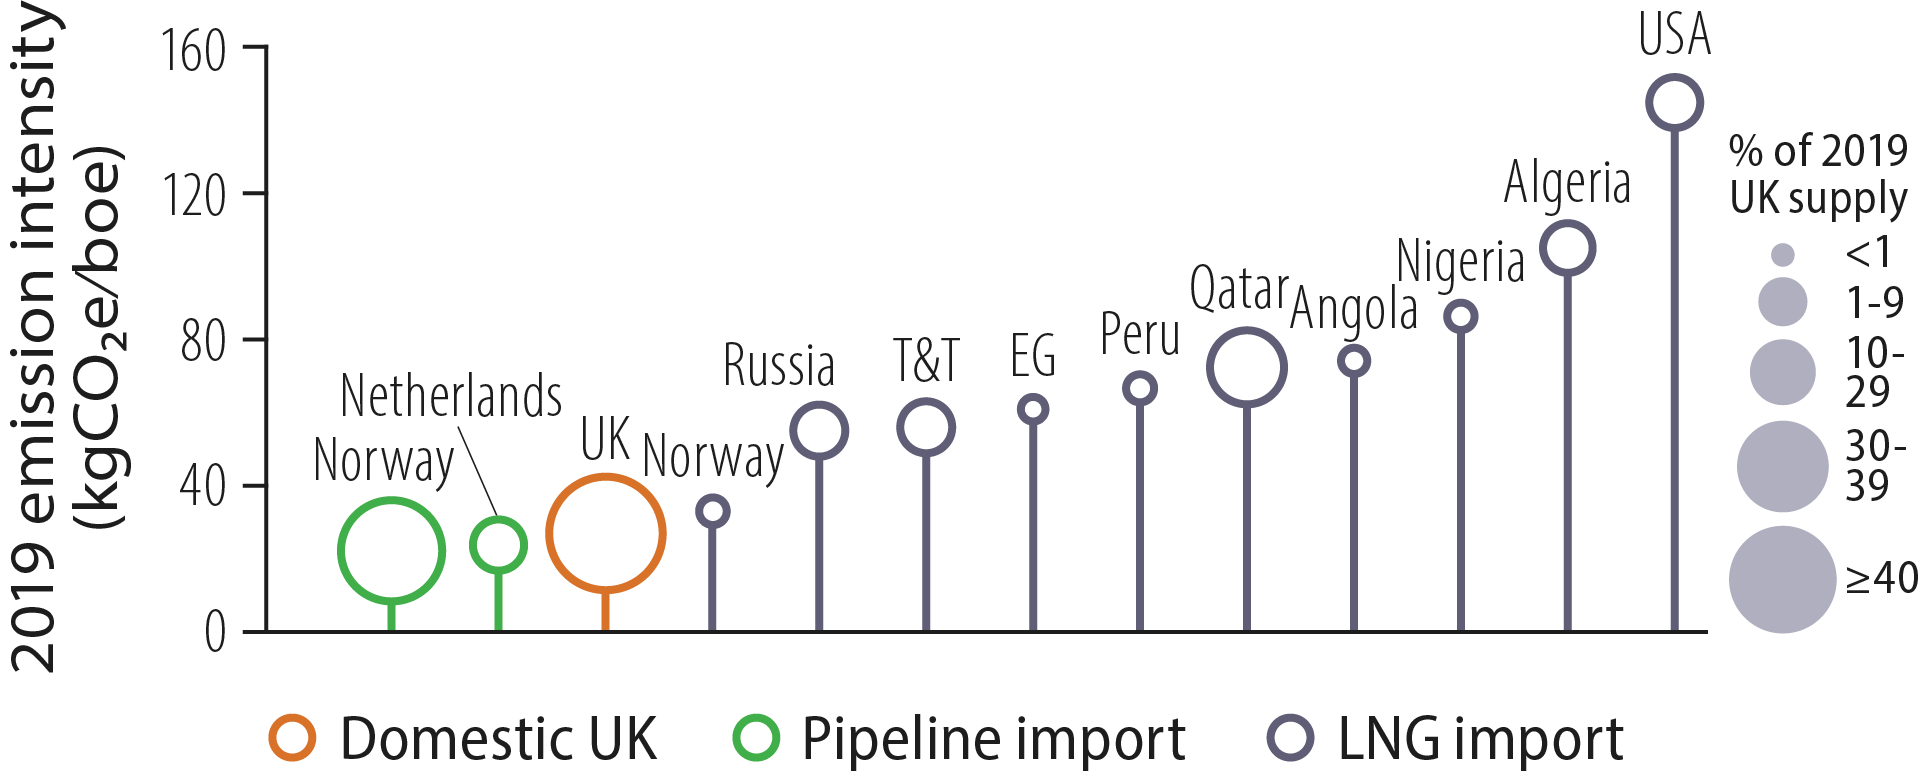 Emission intensity for natural gas deliveries to the UK.